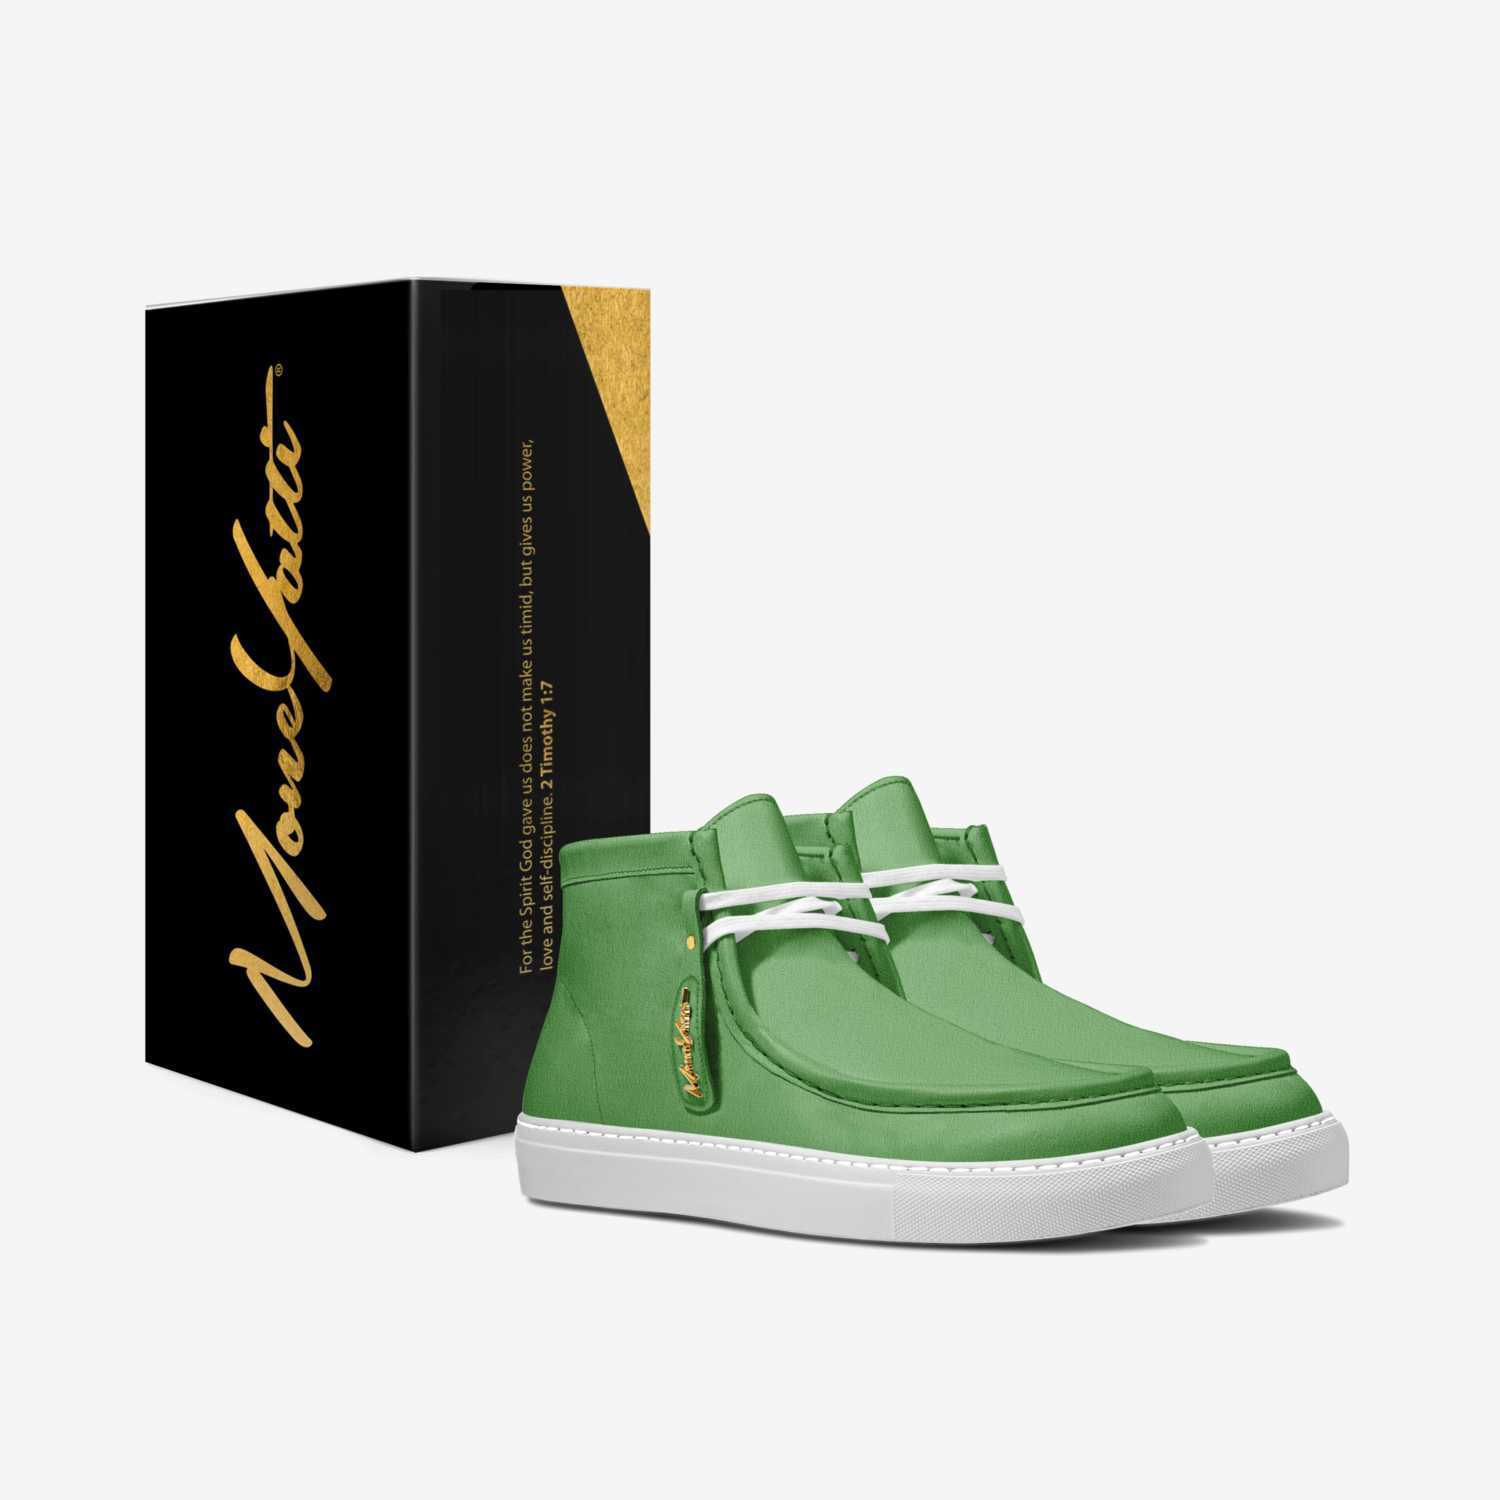 LUX SUEDE 014 custom made in Italy shoes by Moneyatti Brand | Box view